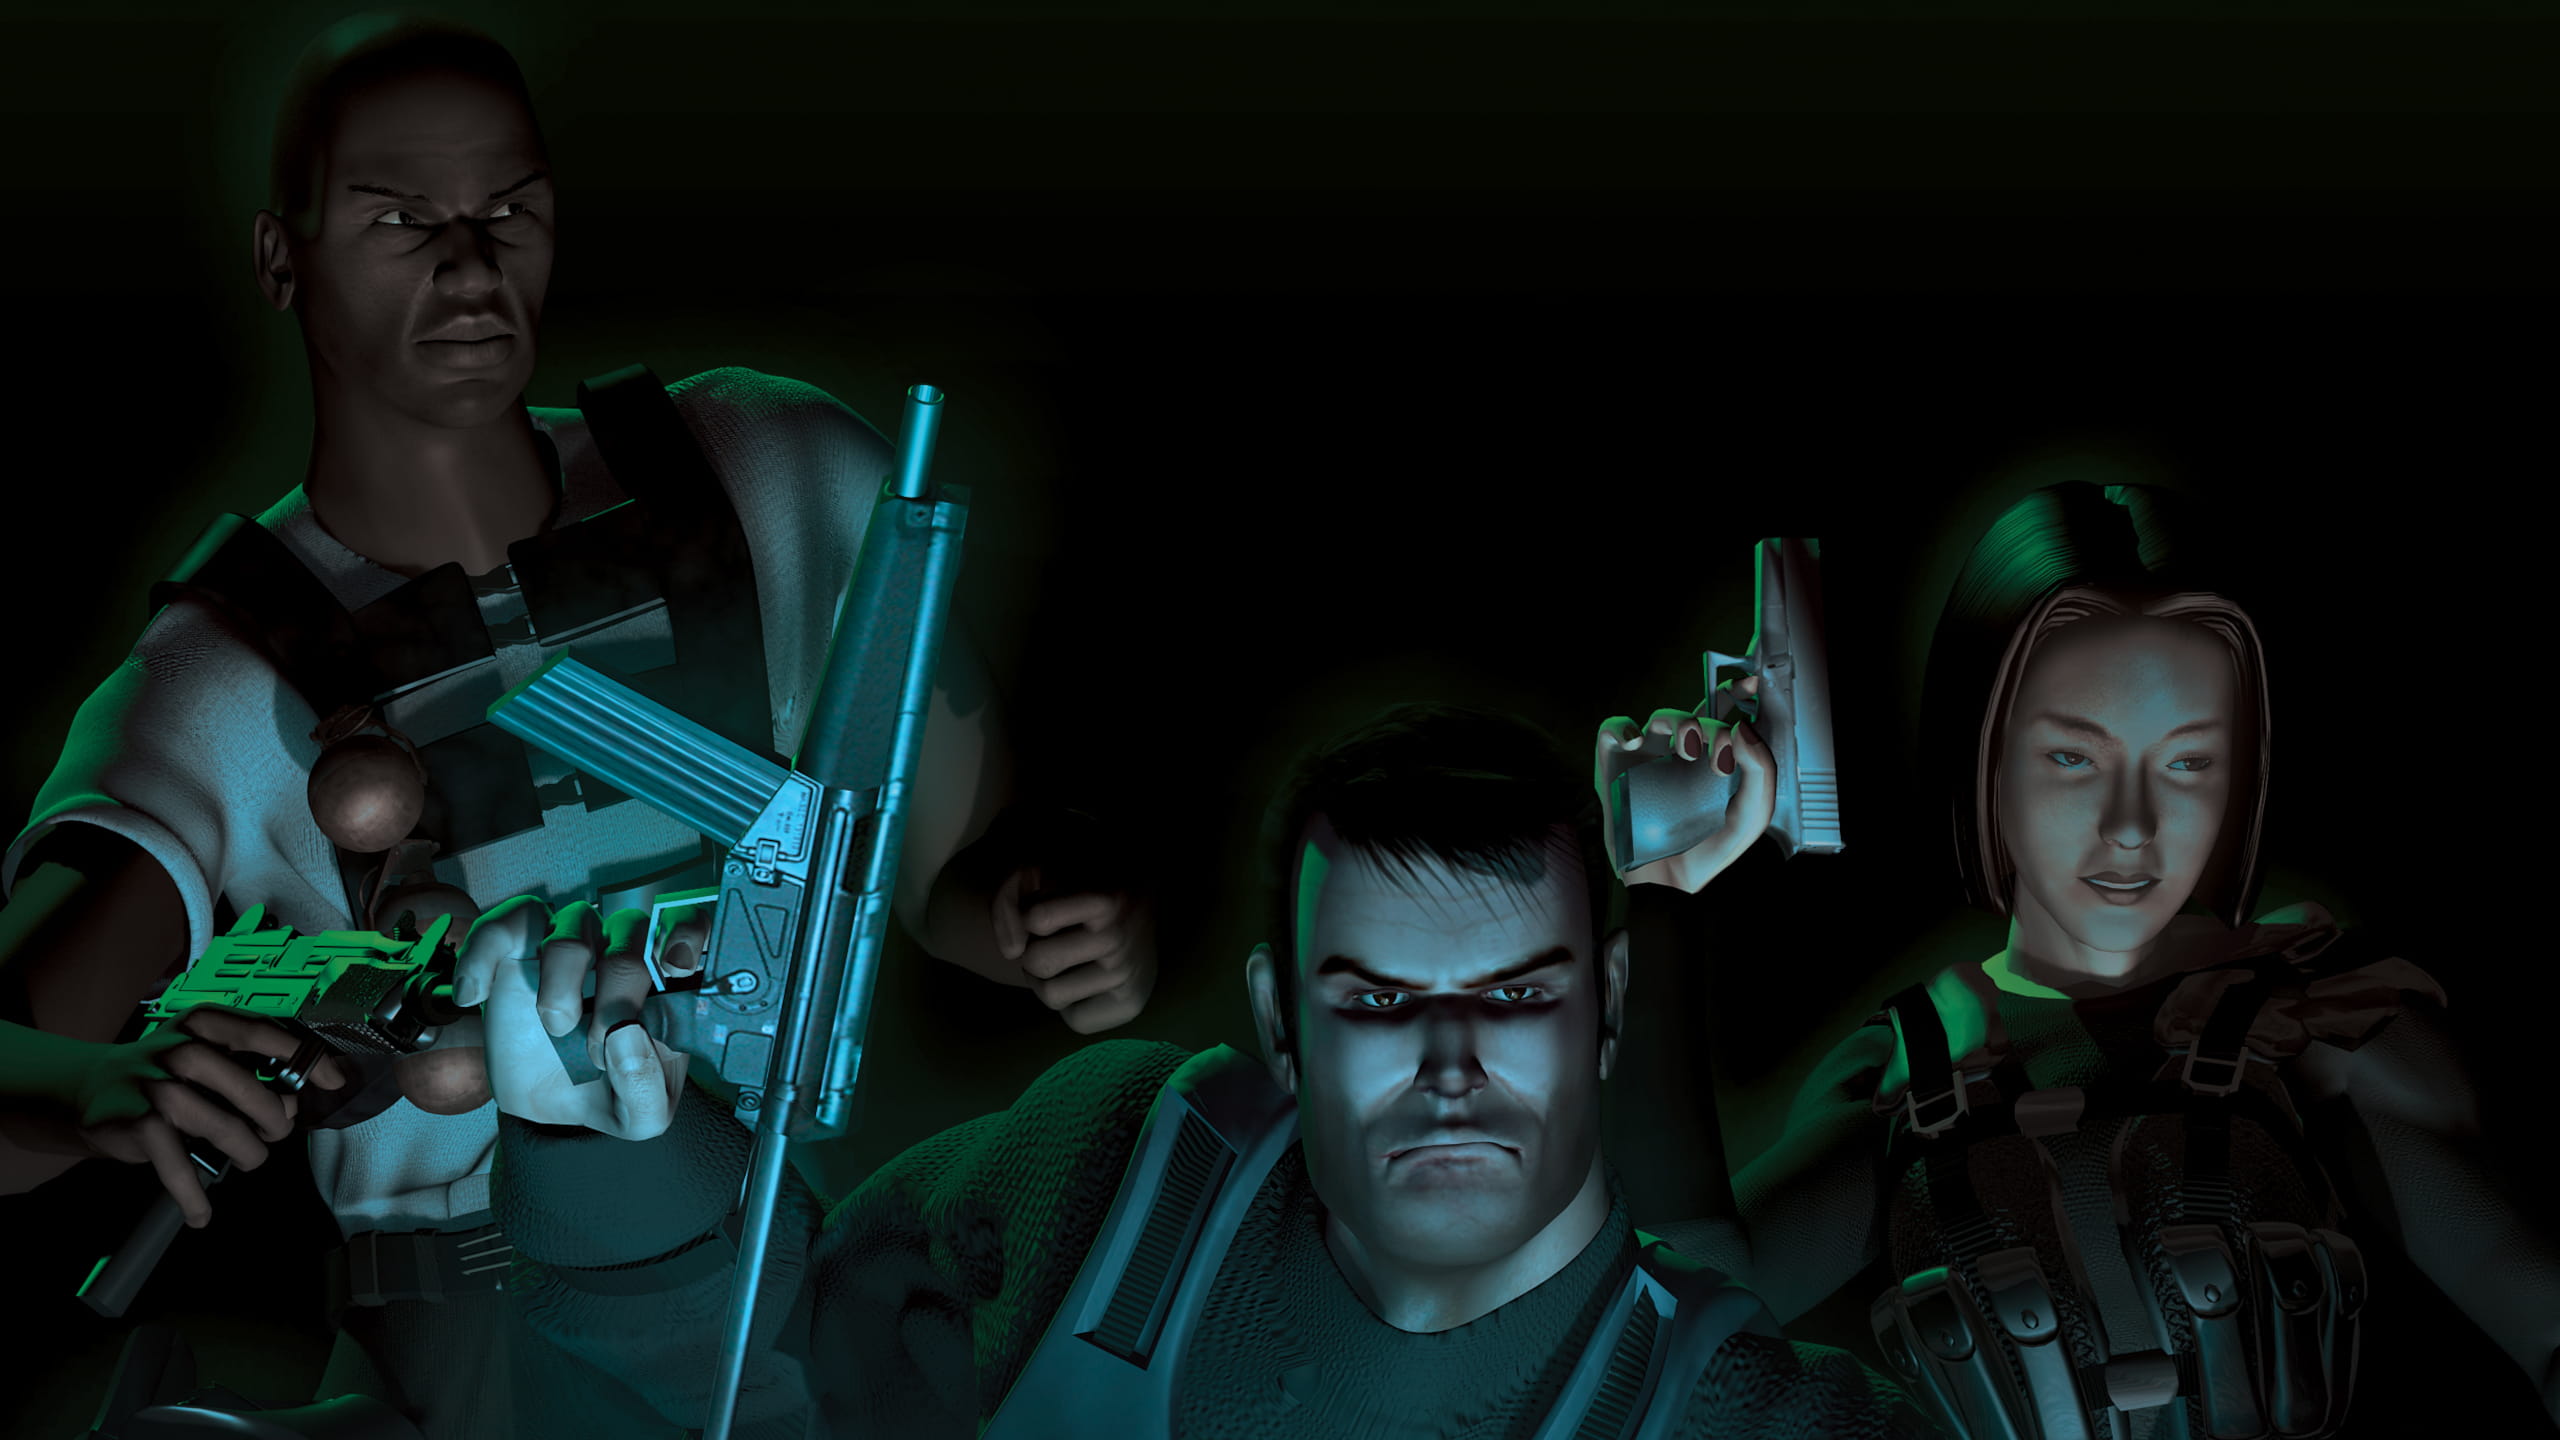 Syphon Filter 3 screenshots, images and pictures - Giant Bomb